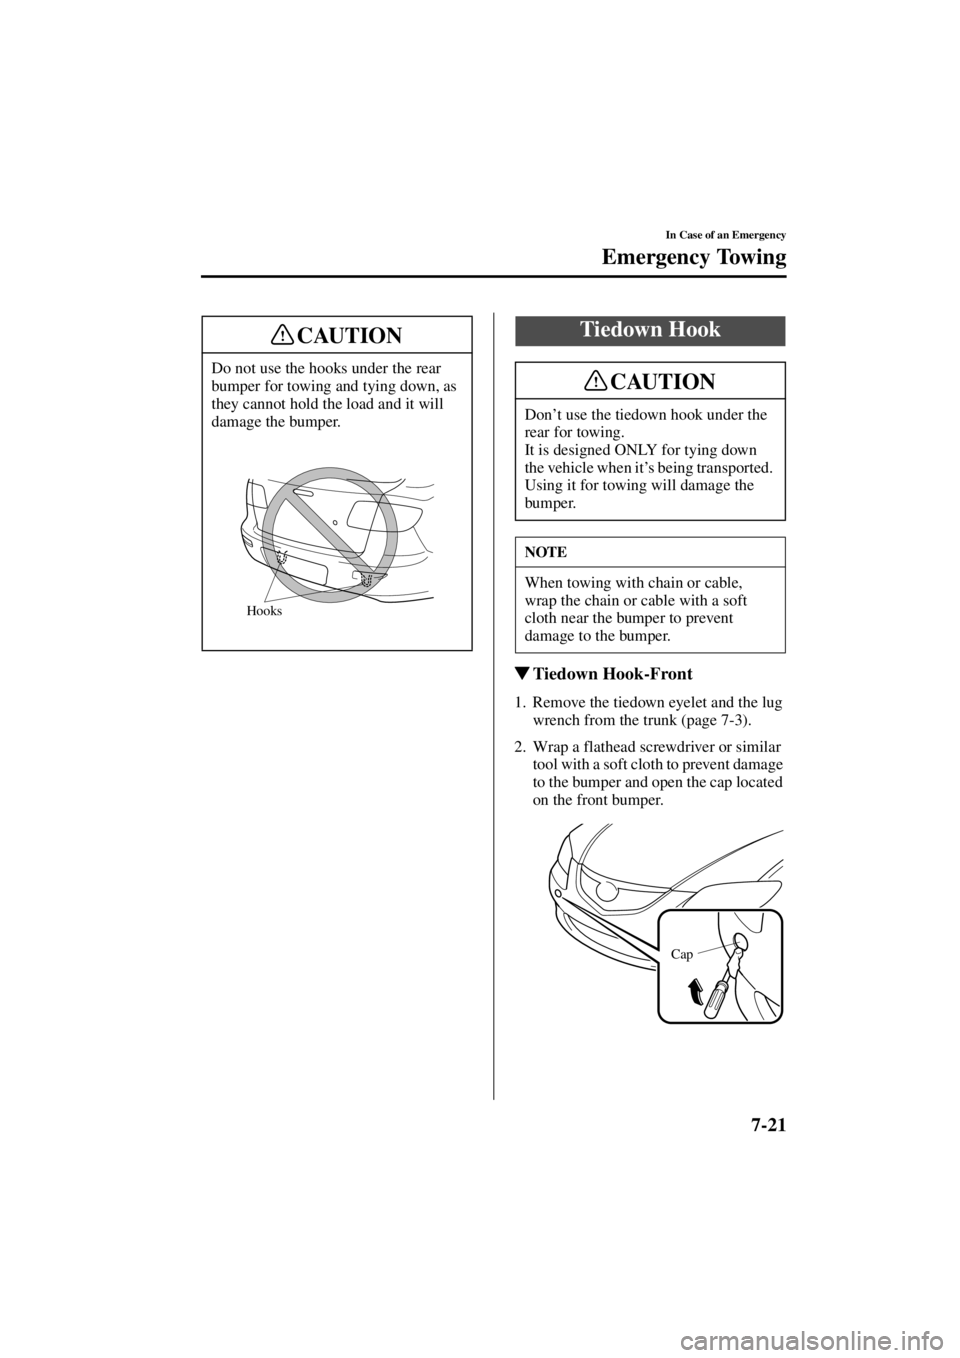 MAZDA MODEL 3 5-DOOR 2004  Owners Manual 7-21
In Case of an Emergency
Emergency Towing
Form No. 8S18-EA-03I
Tiedown Hook-Front
1. Remove the tiedown eyelet and the lug 
wrench from the trunk (page 7-3).
2. Wrap a flathead screwdriver or sim